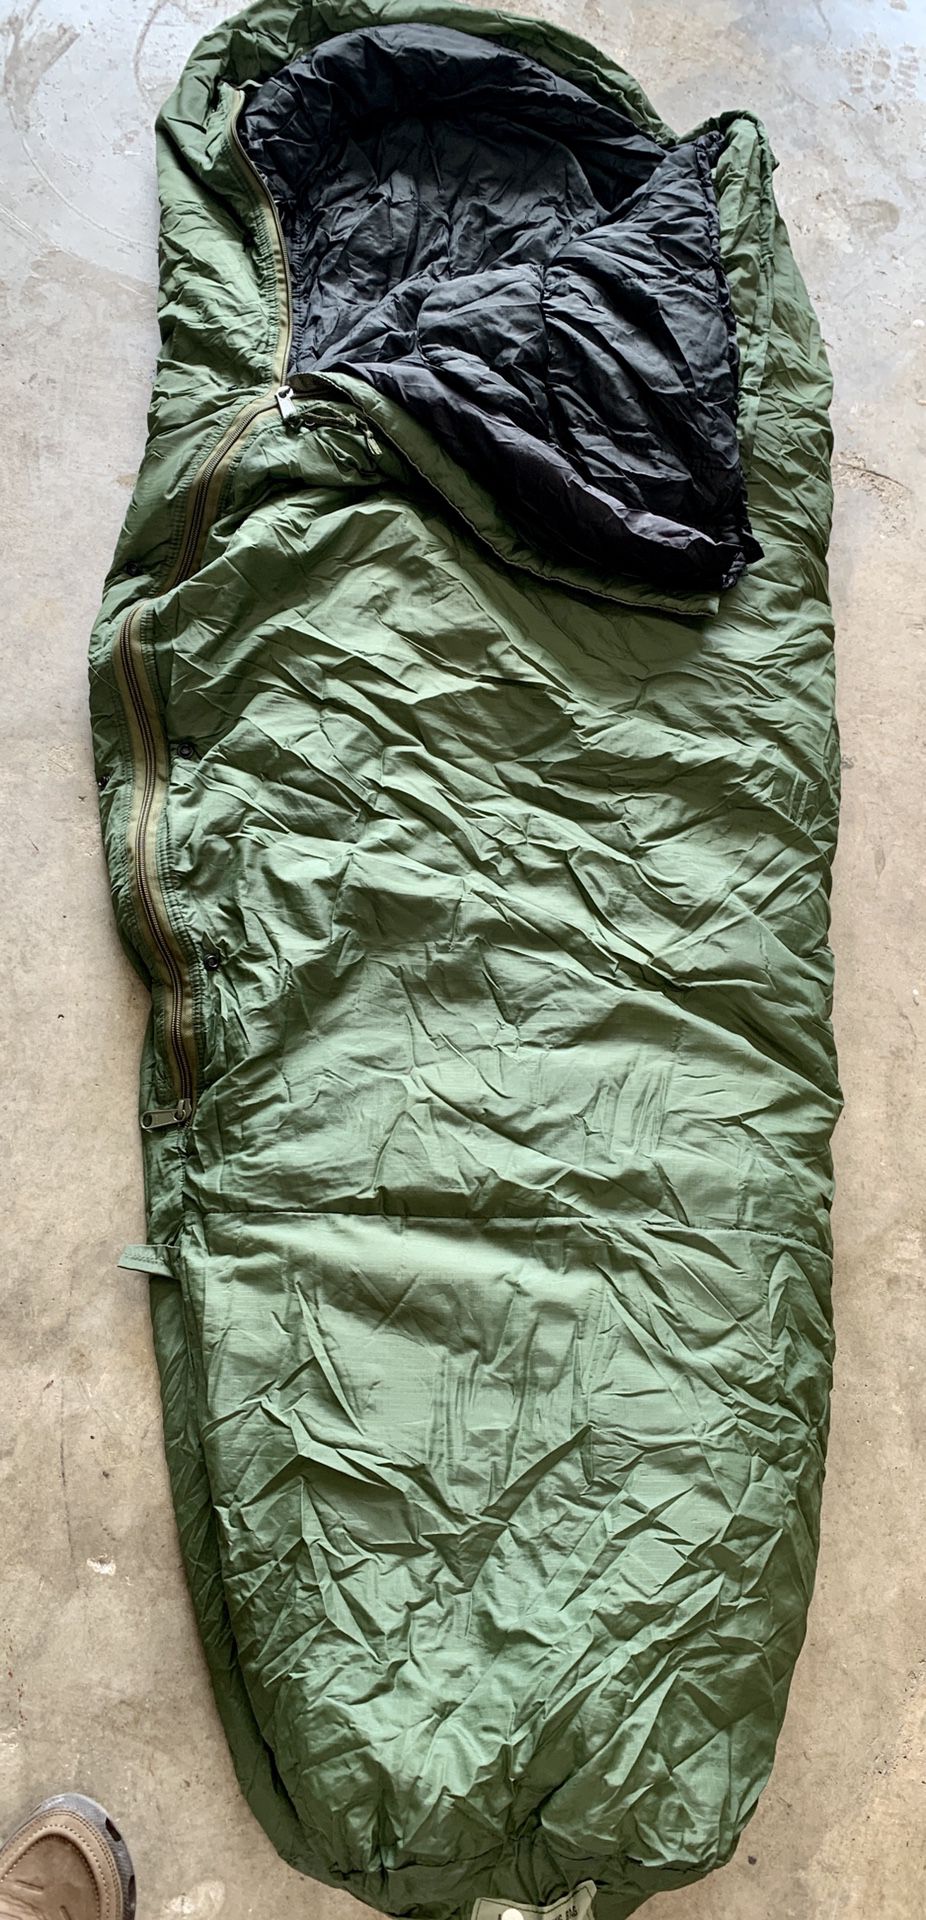 MILITARY ISSUE SLEEPING BAG SYSTEM